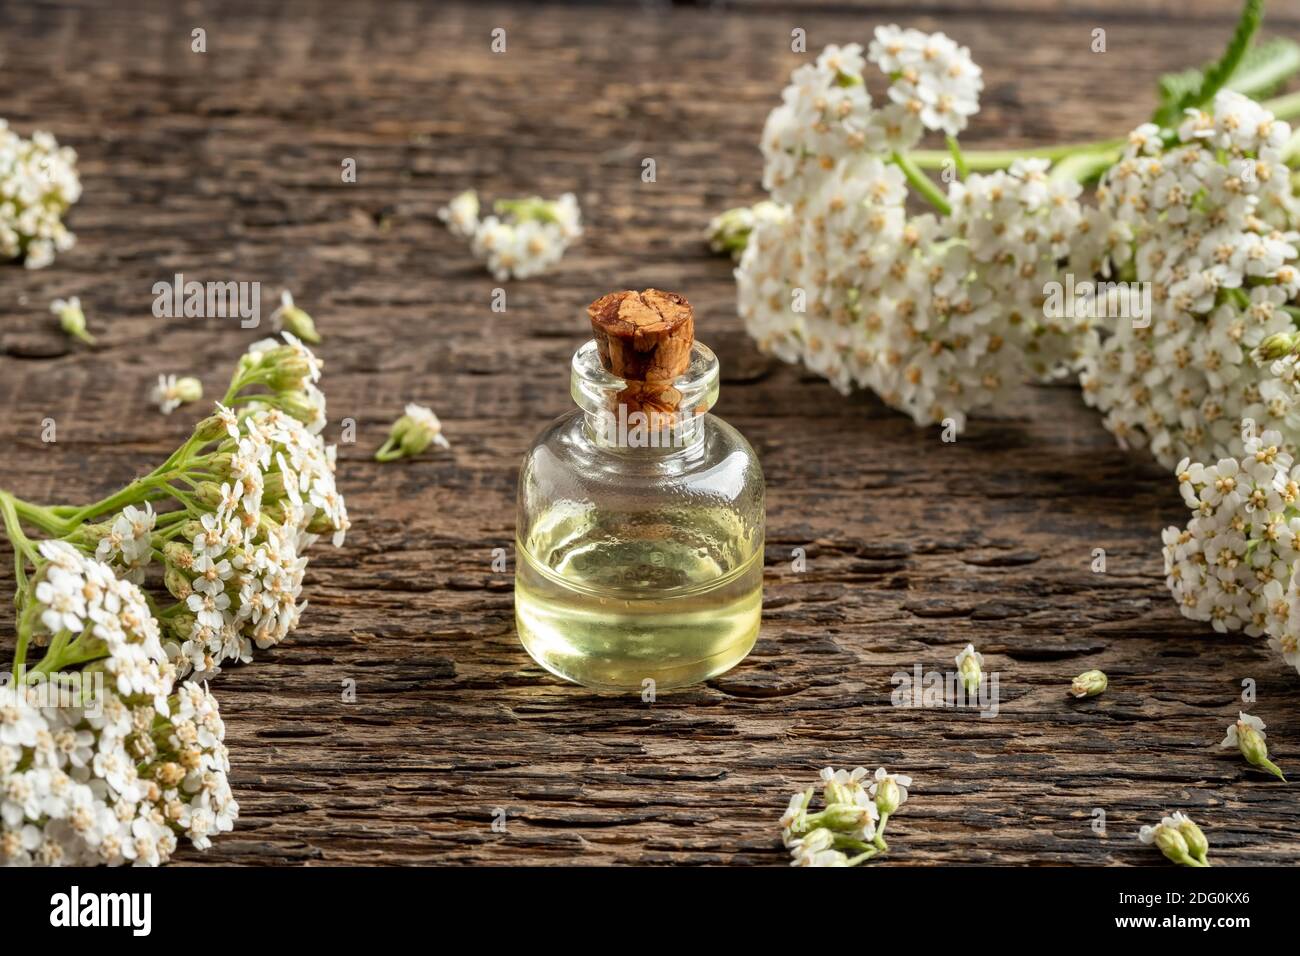 Essential oil bottle with fresh blooming yarrow plant Stock Photo